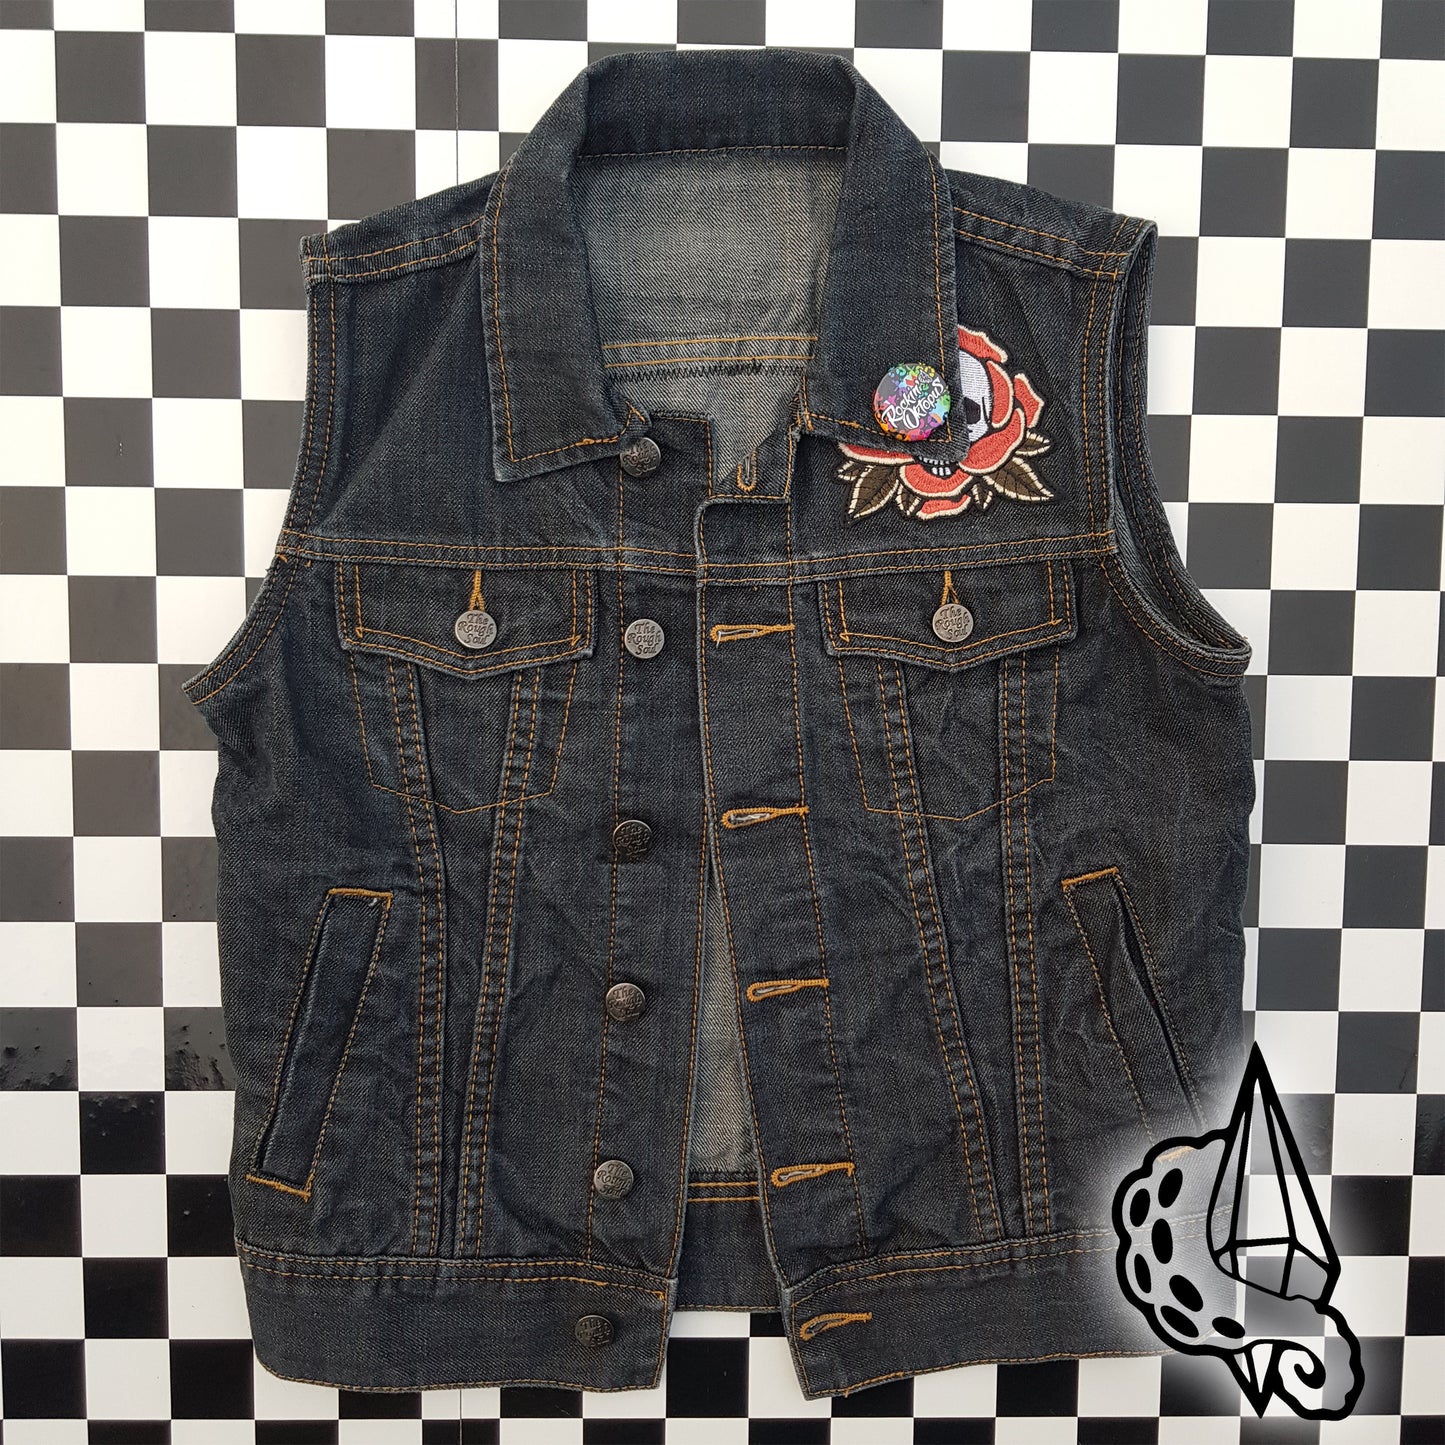 Upcycling/ Veste à patchs customisée, "Rock'N'Roll", Taille 10 ans